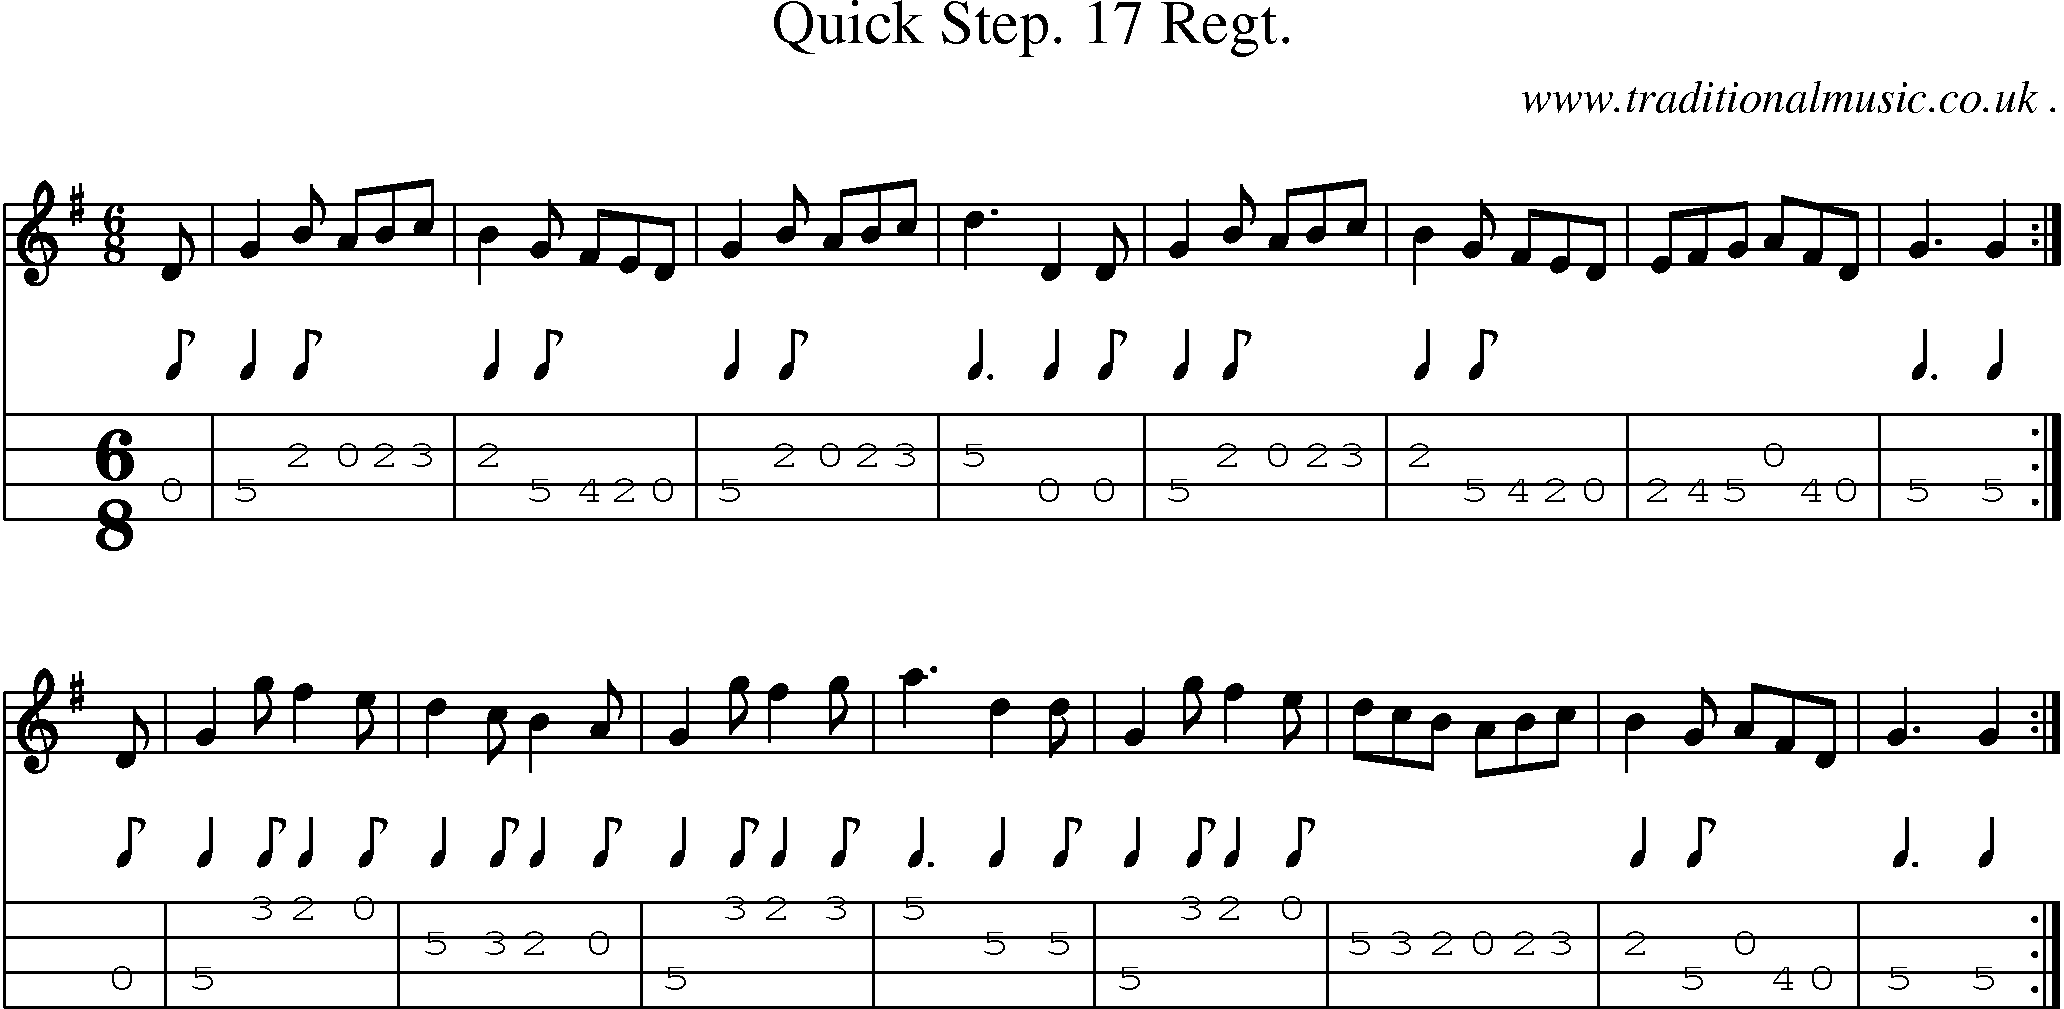 Sheet-Music and Mandolin Tabs for Quick Step 17 Regt